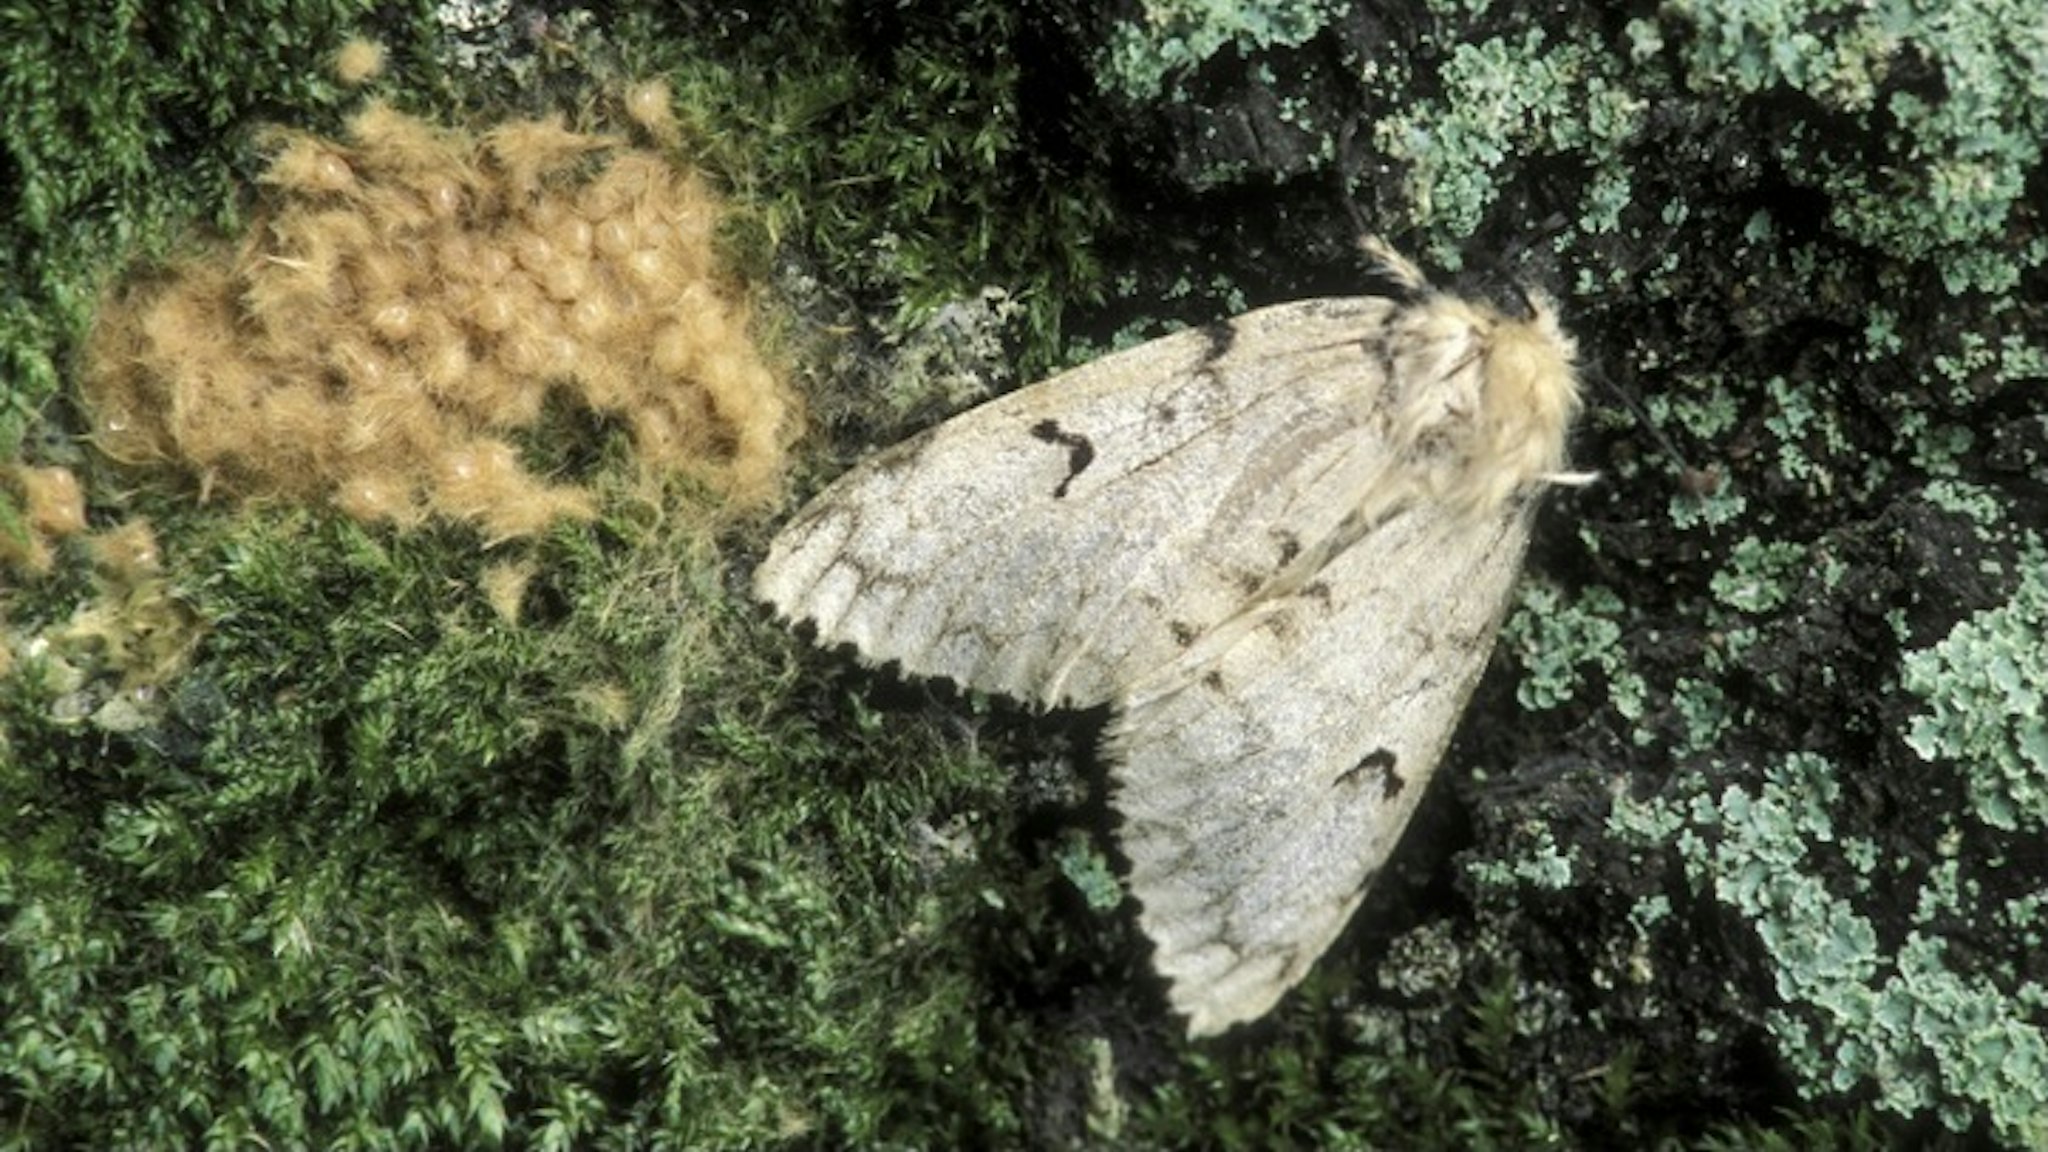 Gypsy moth. Female with egg mass, Lymantria dispar. One female can produce an egg mass of 400 eggs. Michigan. Forest tree pests. - stock photo Ed Reschke via Getty Images